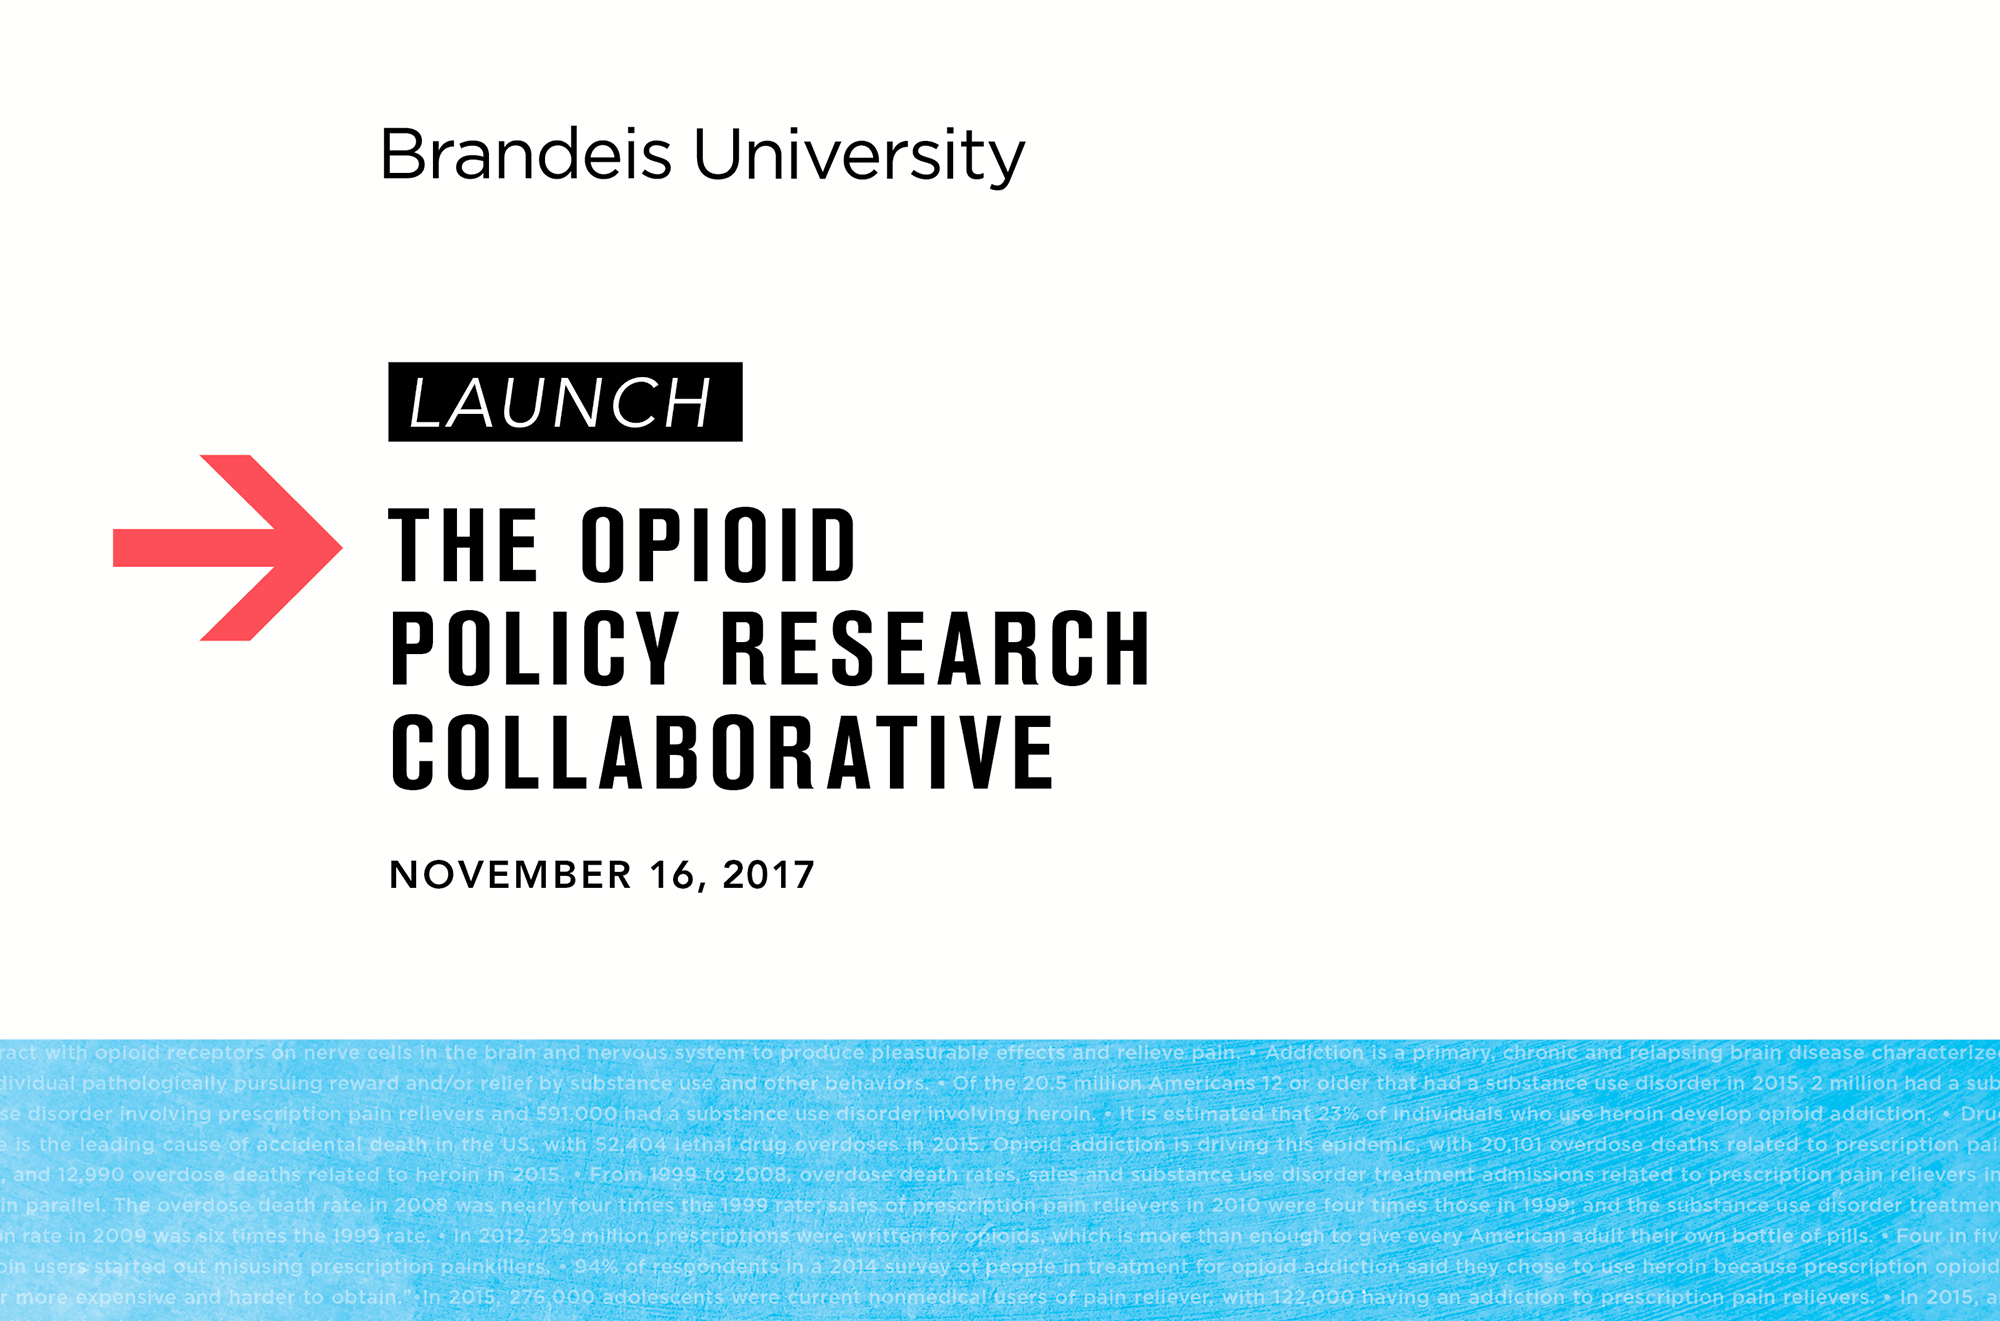 graphic text displaying launch of opioid policy research collaborative, November 16, 2017